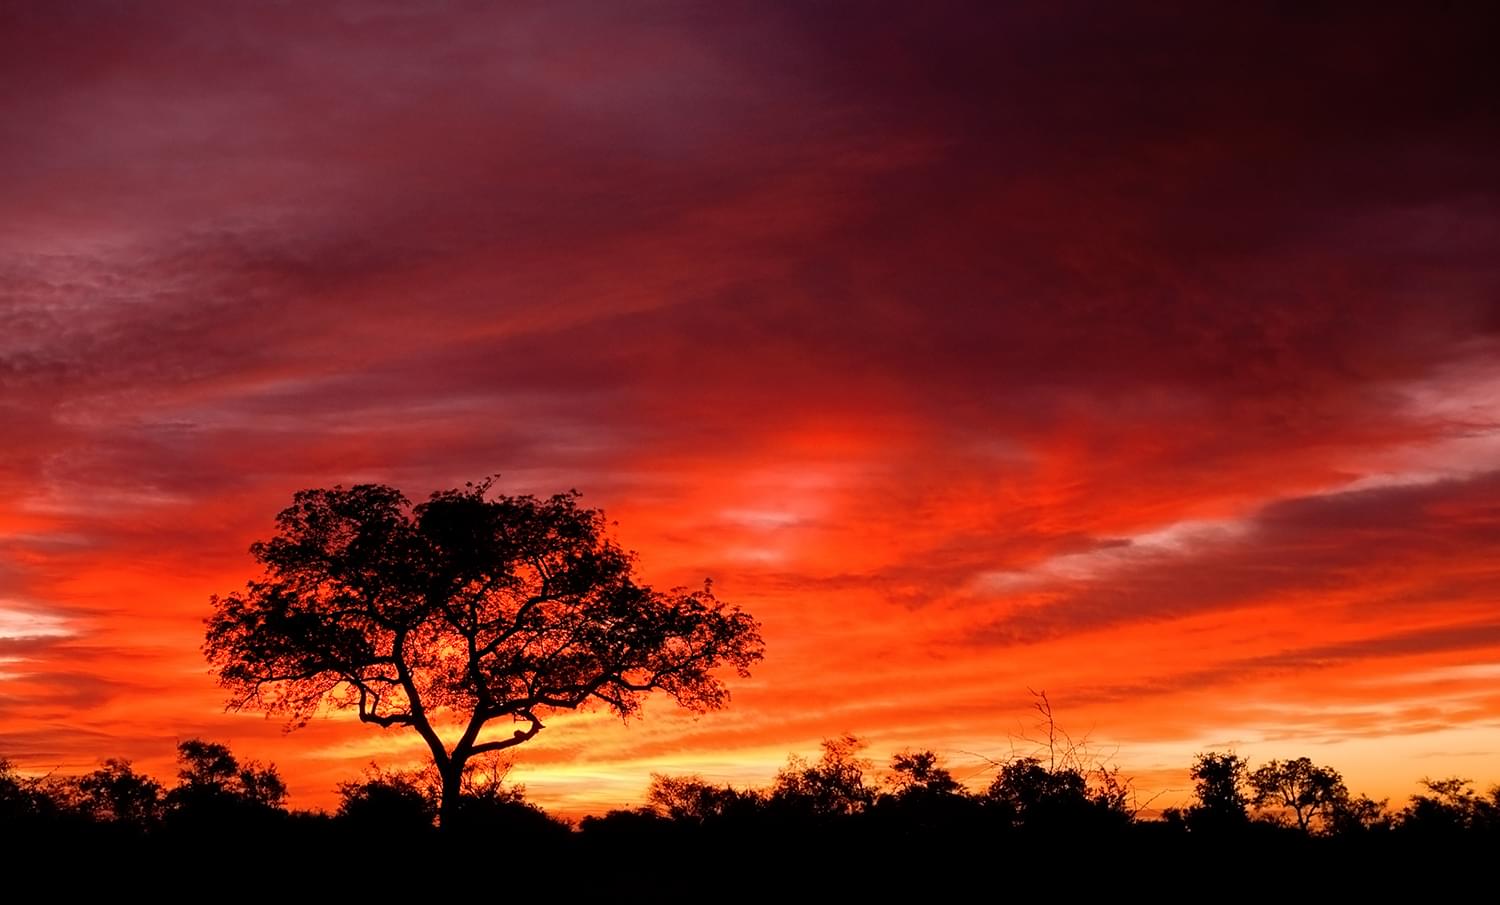 there is a silhouette of some trees with one larger tree standing out. Behind there is a dark red and orange sunset. This looks like a sunset in the Savannah.